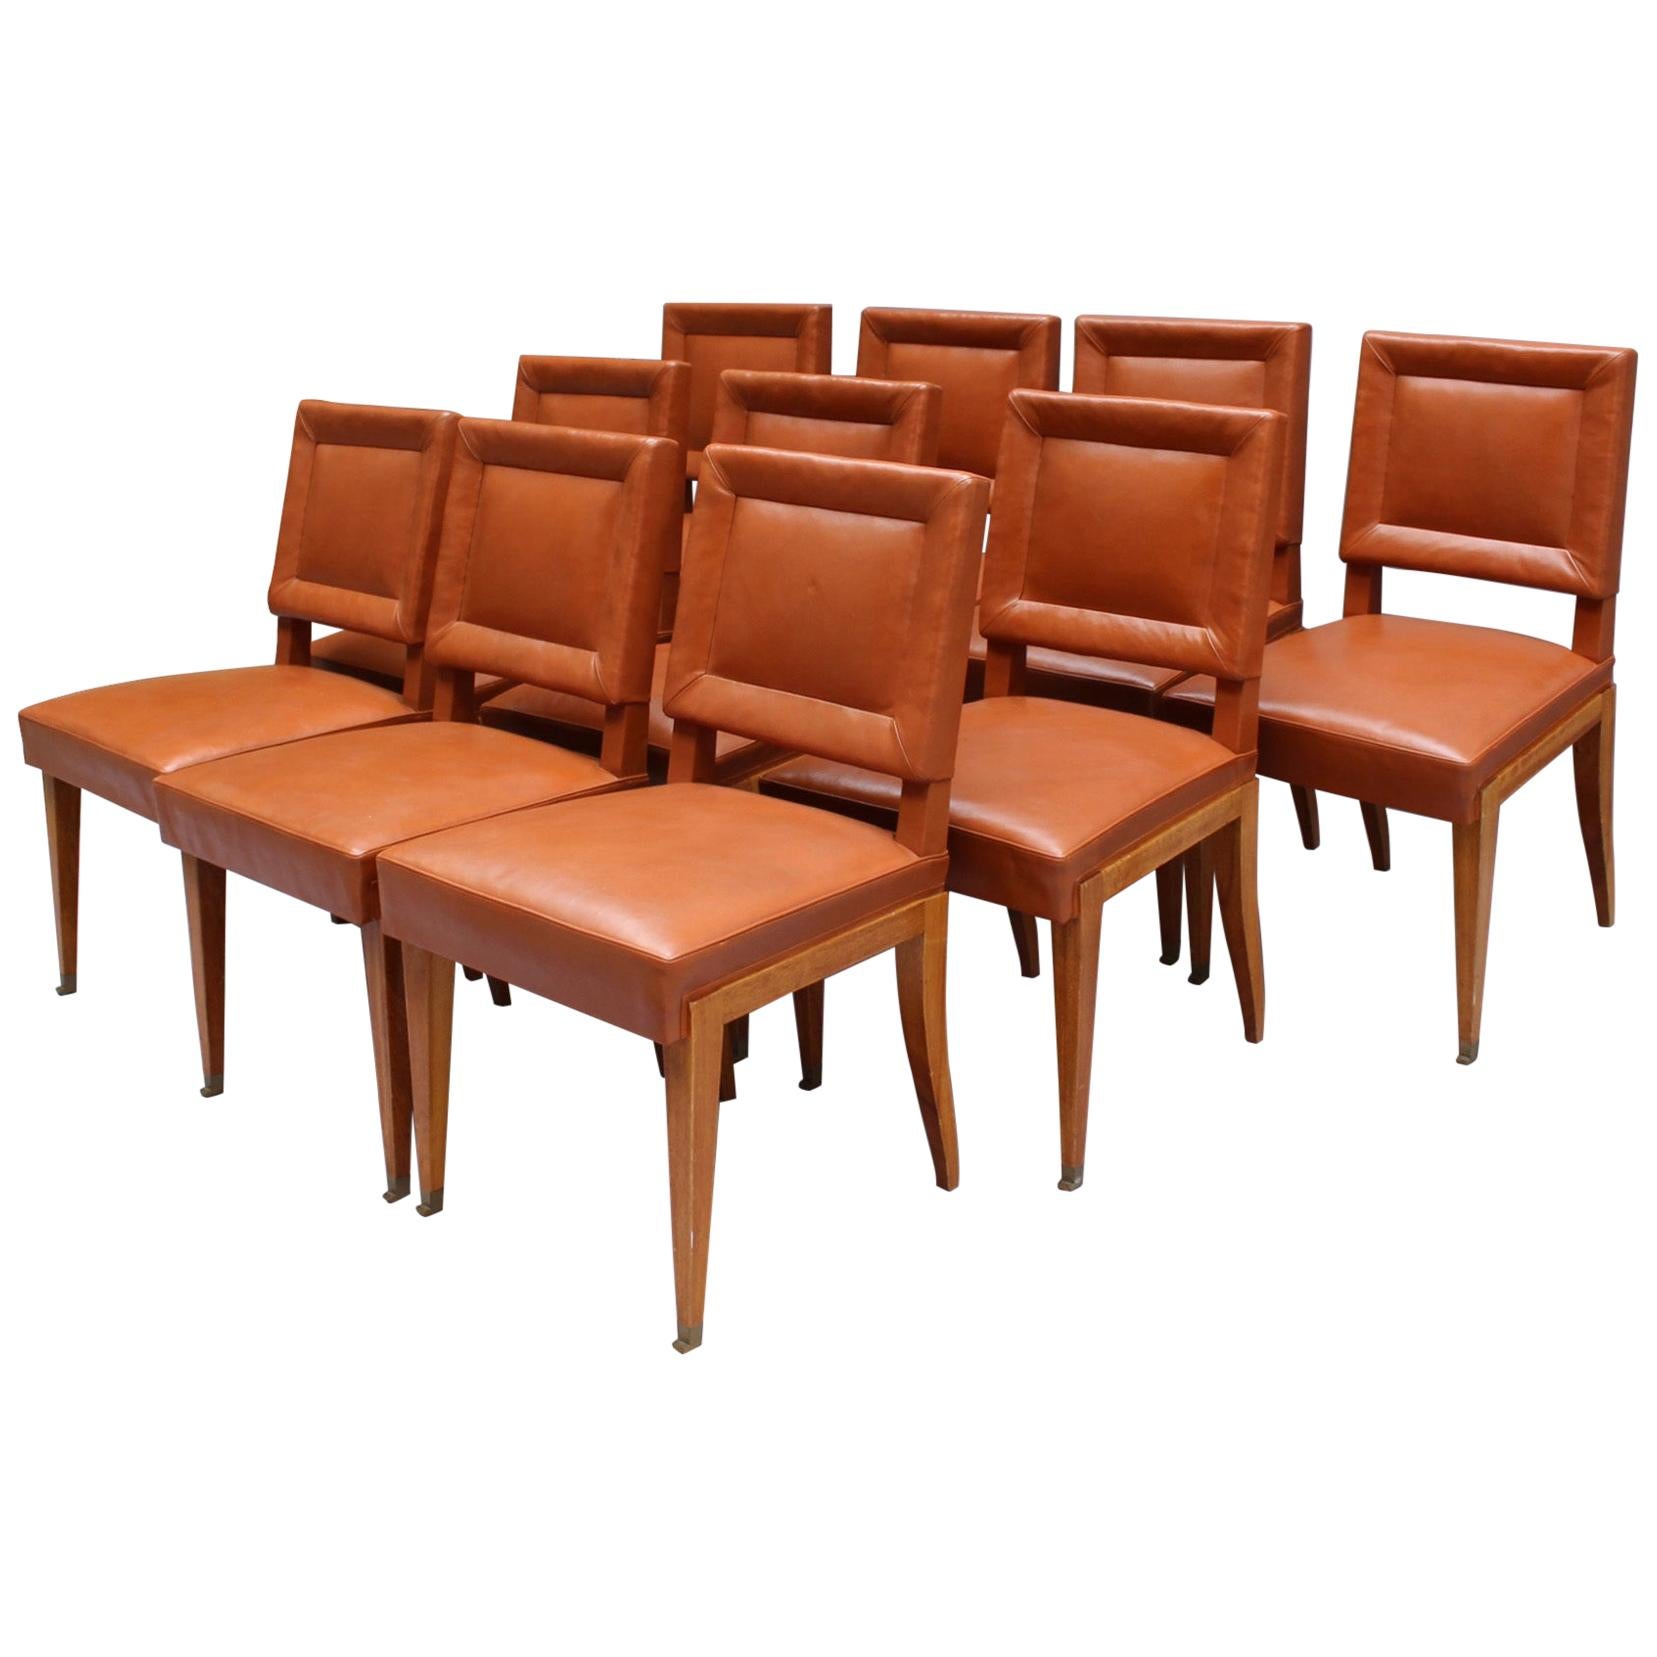 Rare Set of 10 Leather and Mahogany Chairs by Jacques Quinet